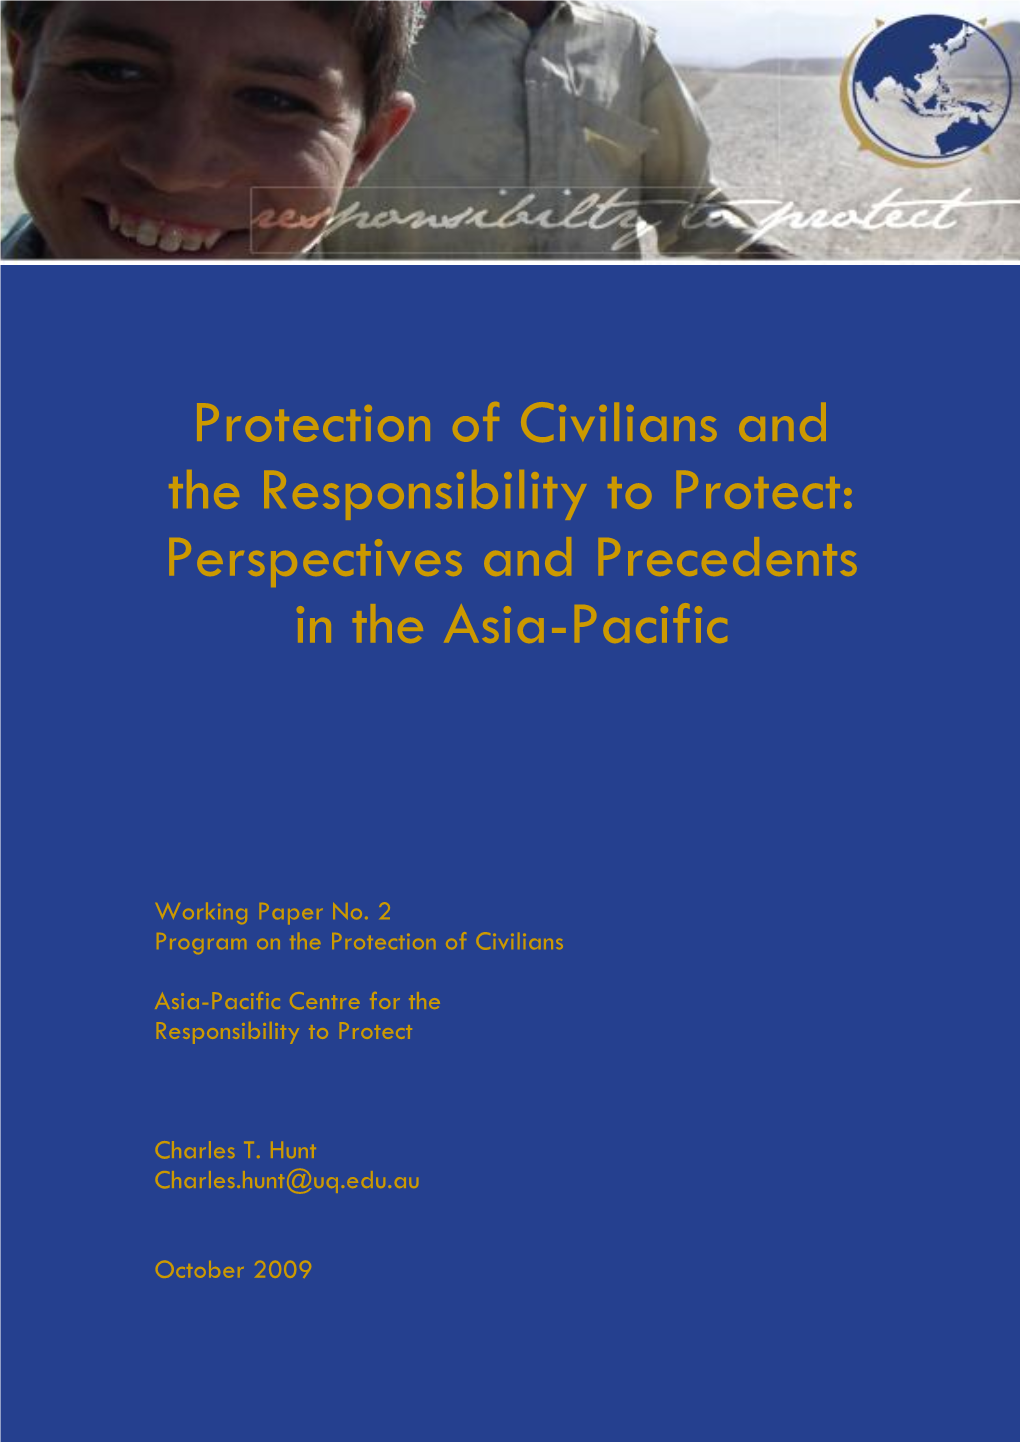 Protection of Civilians and the Responsibility to Protect: Perspectives and Precedents in the Asia-Pacific